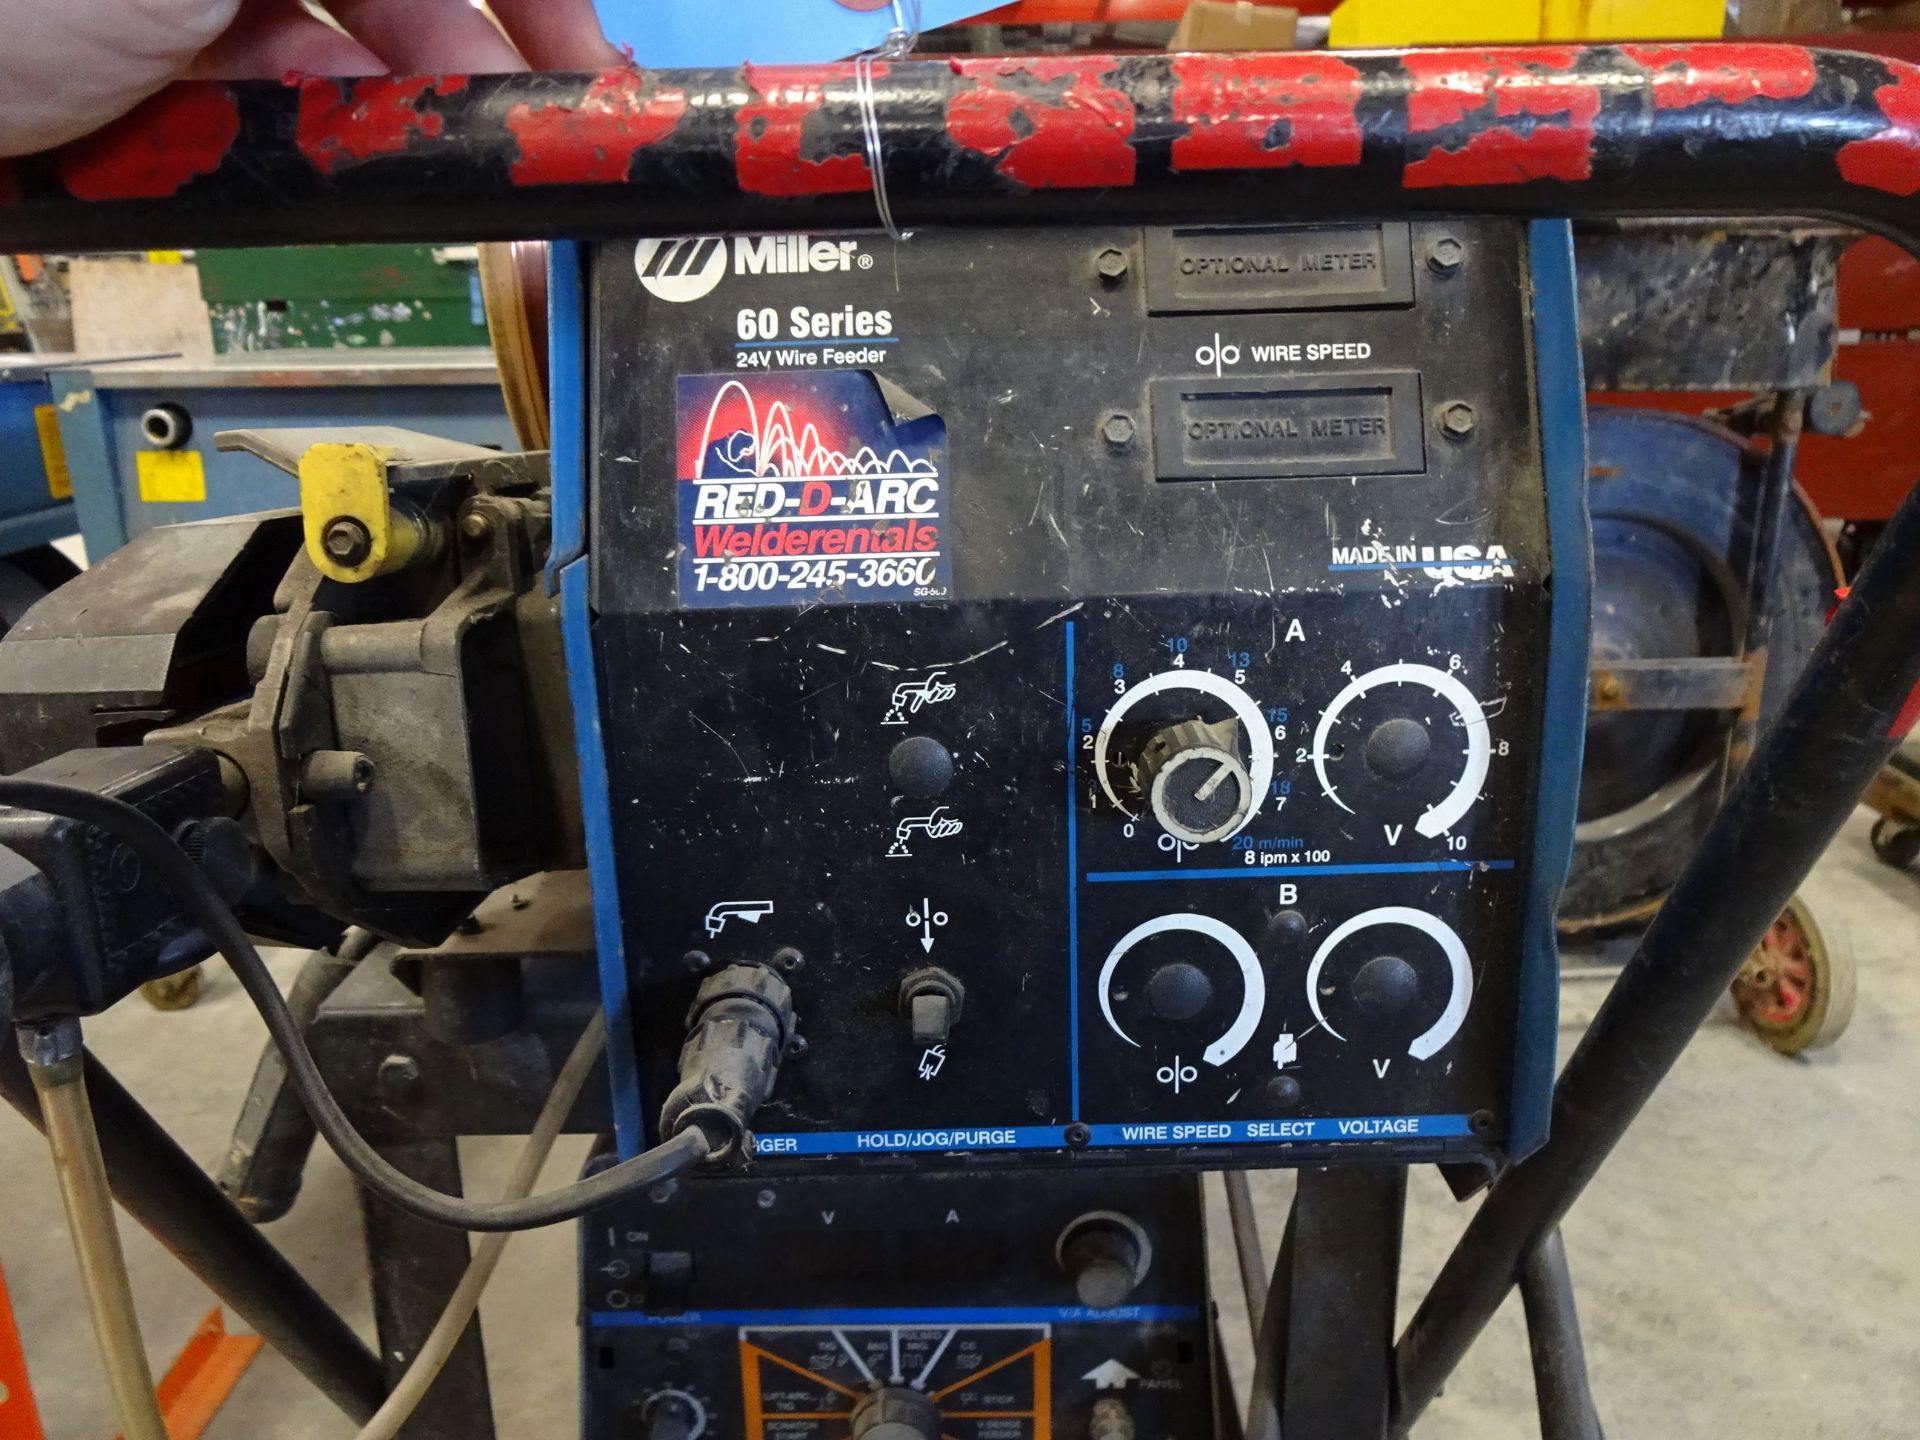 300 AMP RED-D-ARC MODEL EX300 CONTRACTOR PORTABLE WELDING POWER SOURCE; S/N KH451963, WITH MILLER 60 - Image 2 of 4